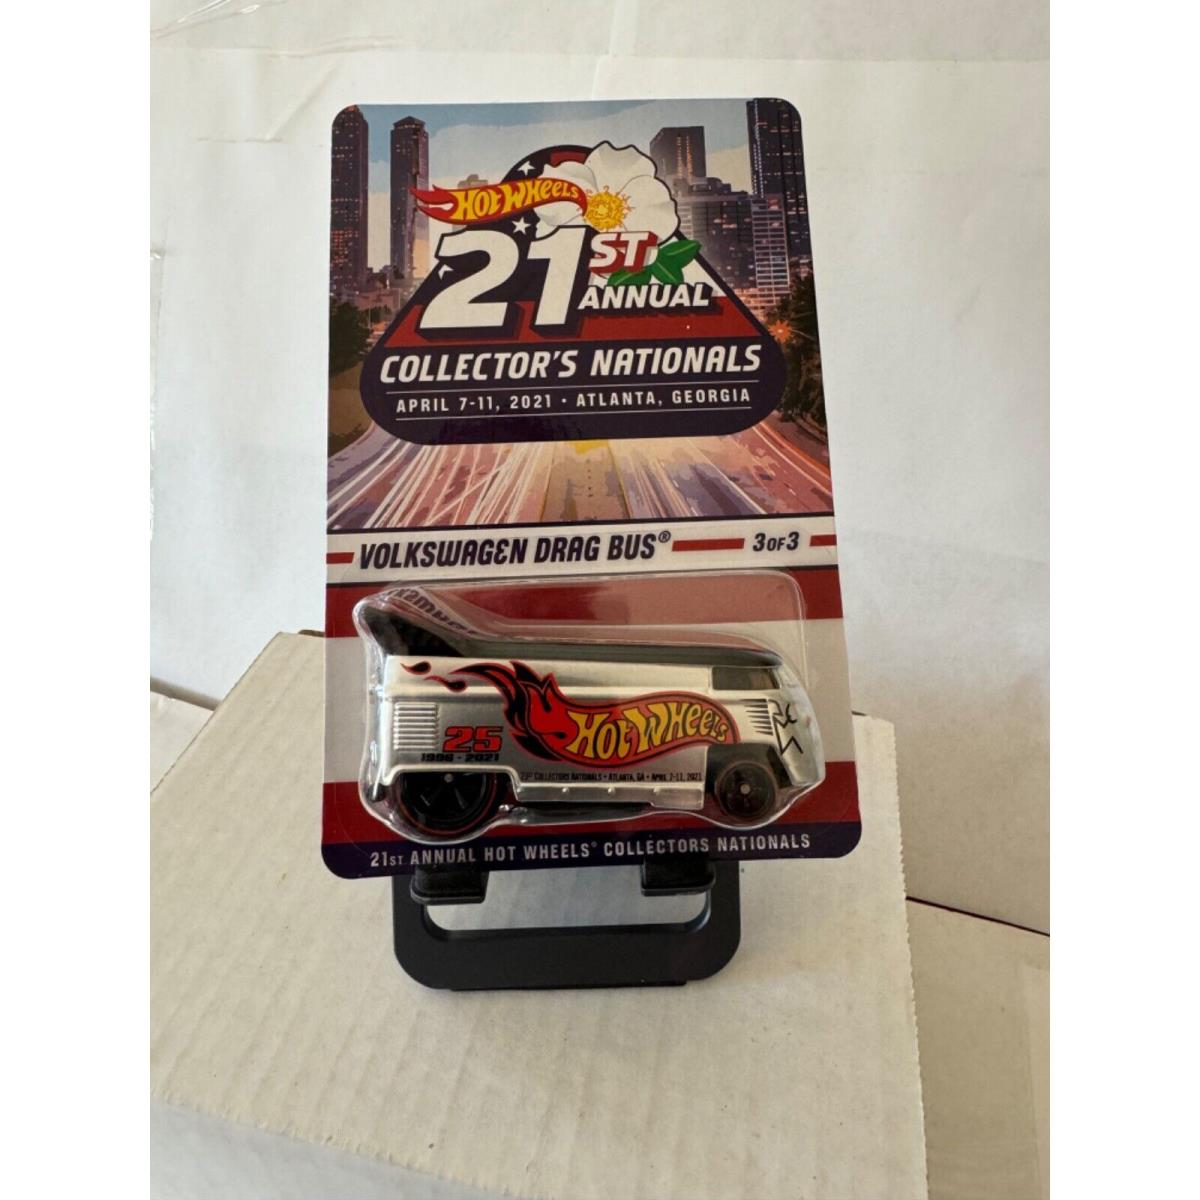 2021 Hot Wheels 21st Annual Collector`s Nationals Volkswagen Drag Bus B4